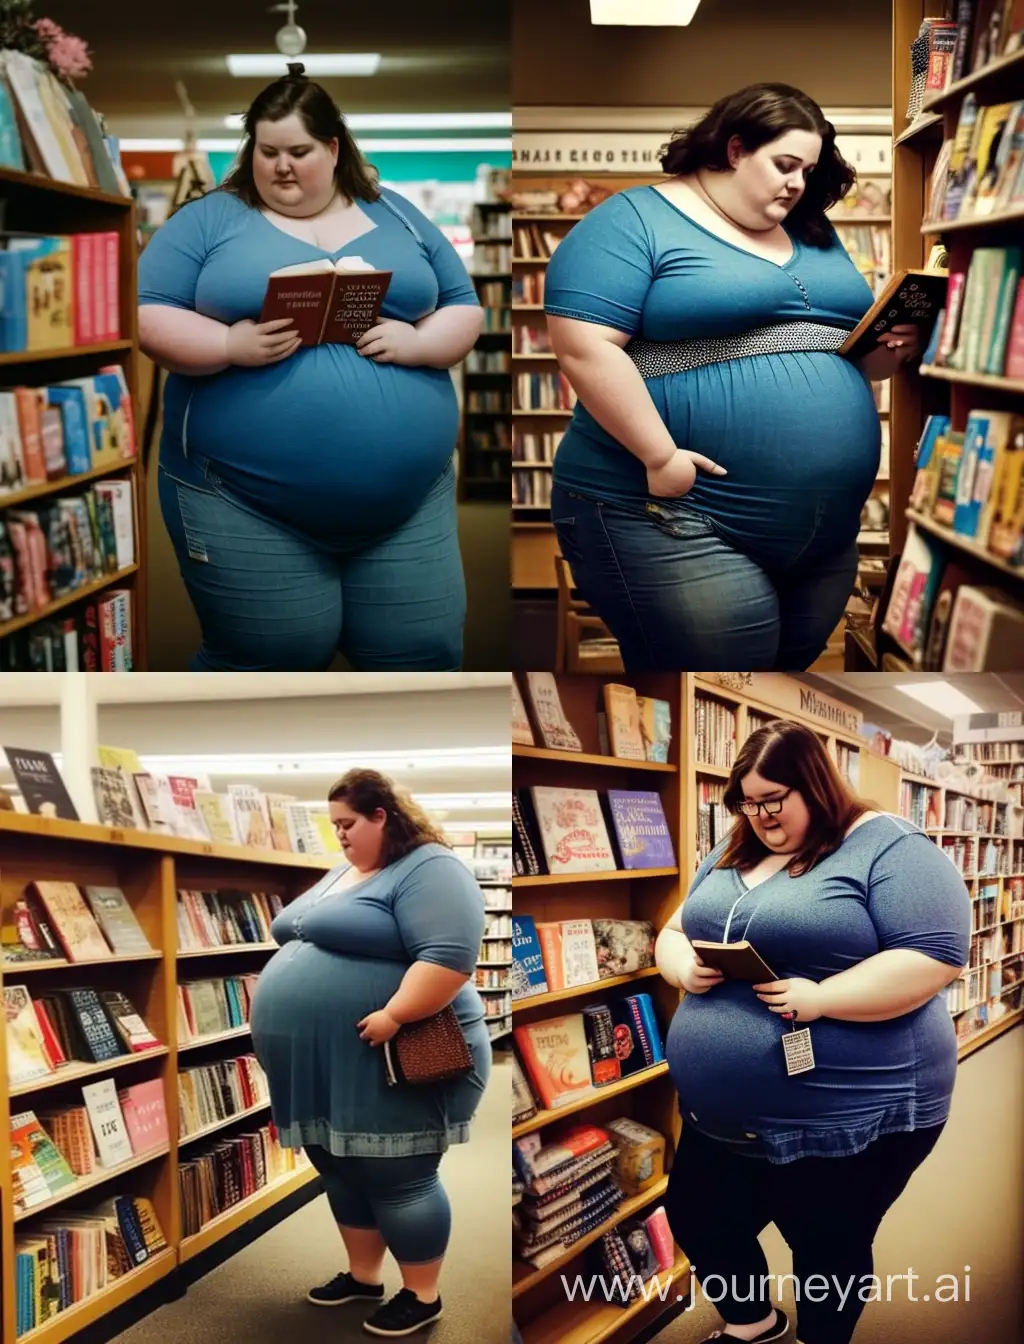 High quality photo. Book store setting. Pregnant Obese woman with a comically large belly. She wears denim dungarees. Hand on back. She is looking at books.